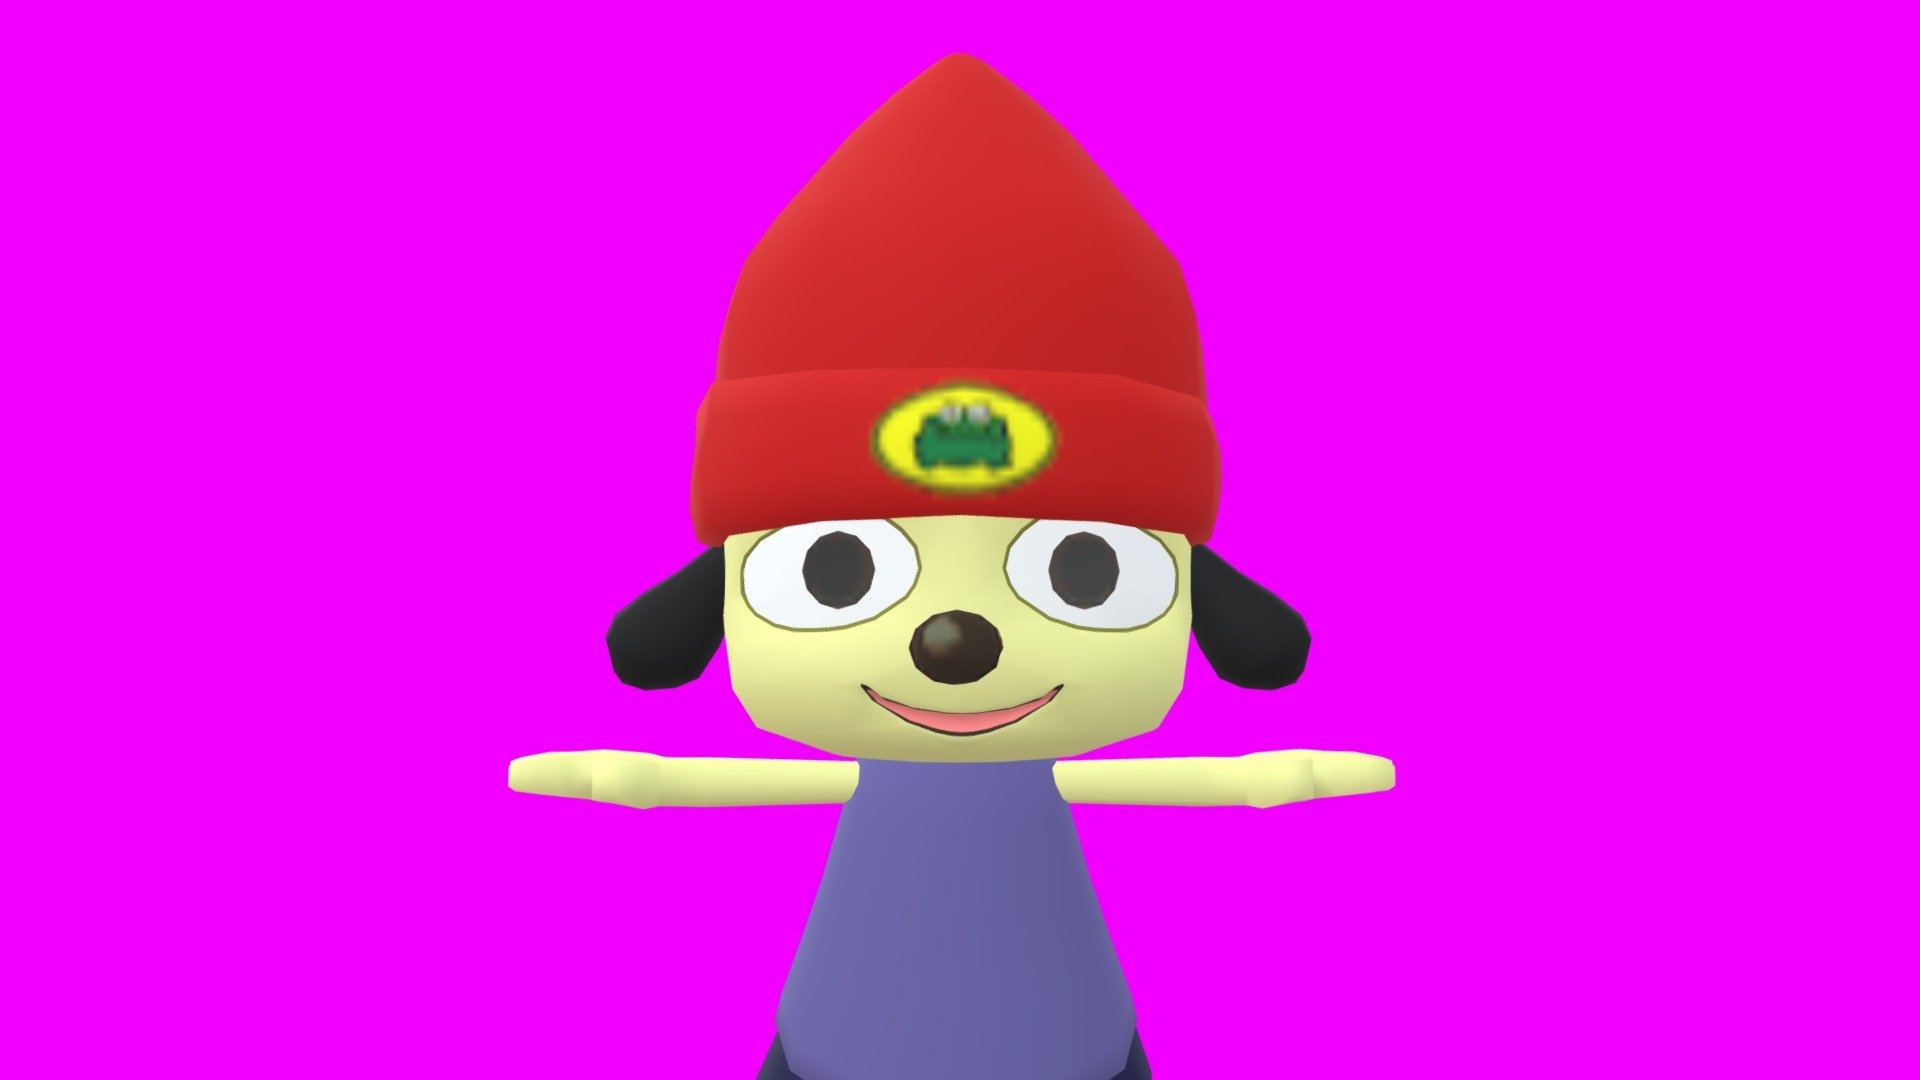 Parappa The Rapper 3 (Fan-Made Prototype 1) (Will add more) : r